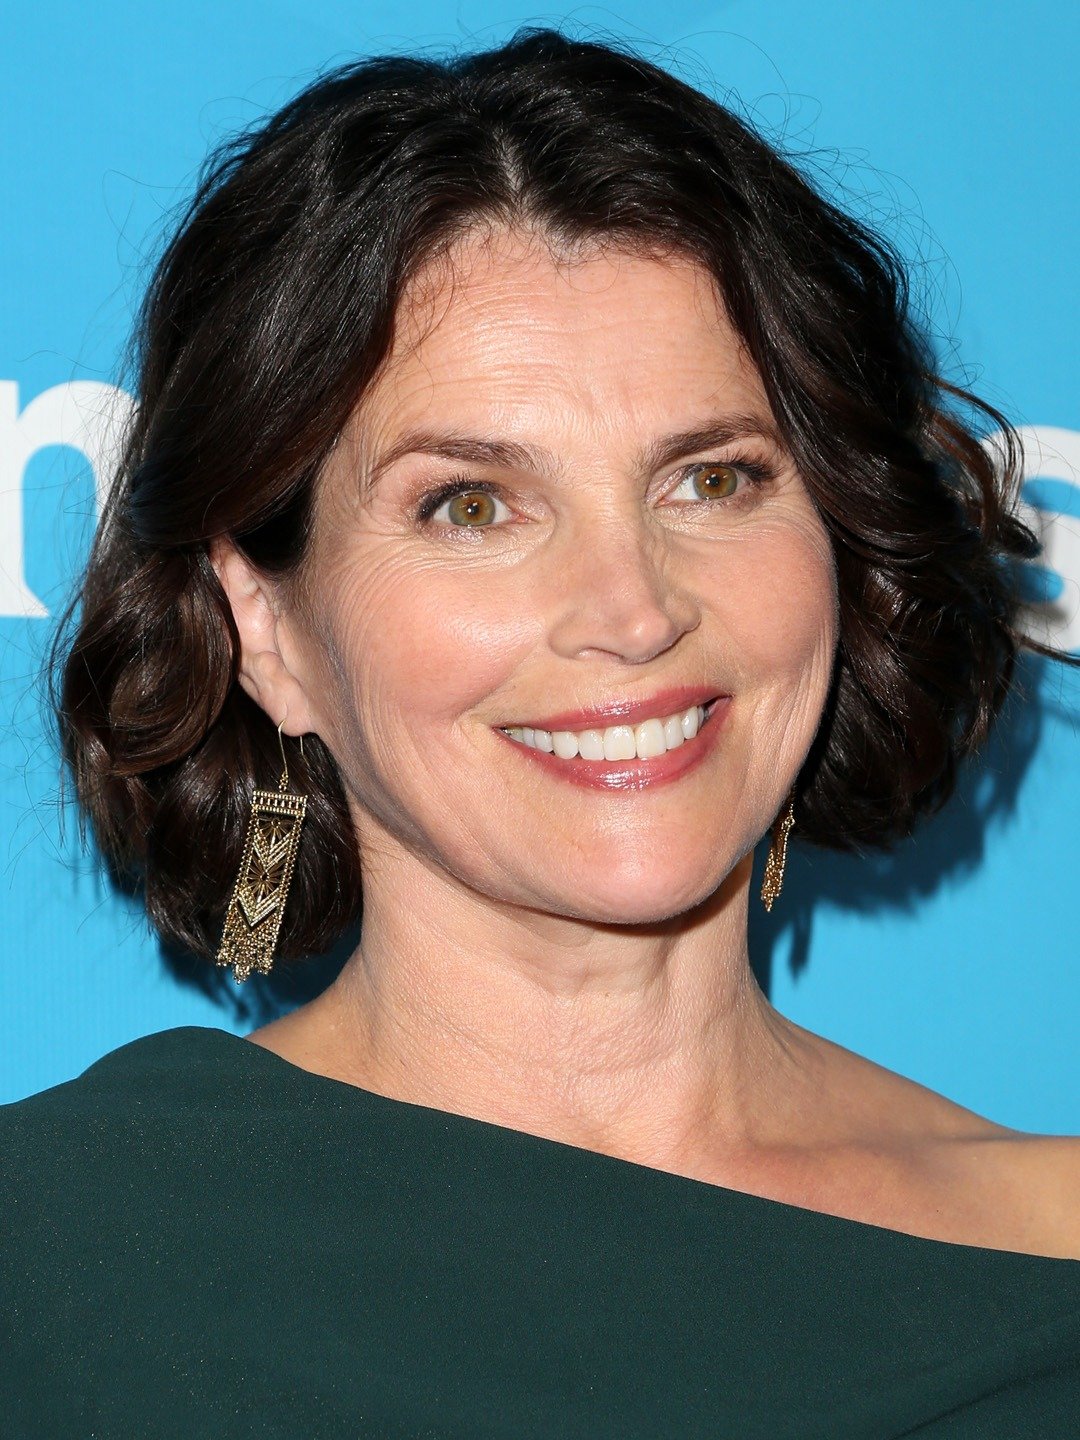 How tall is Julia Ormond?